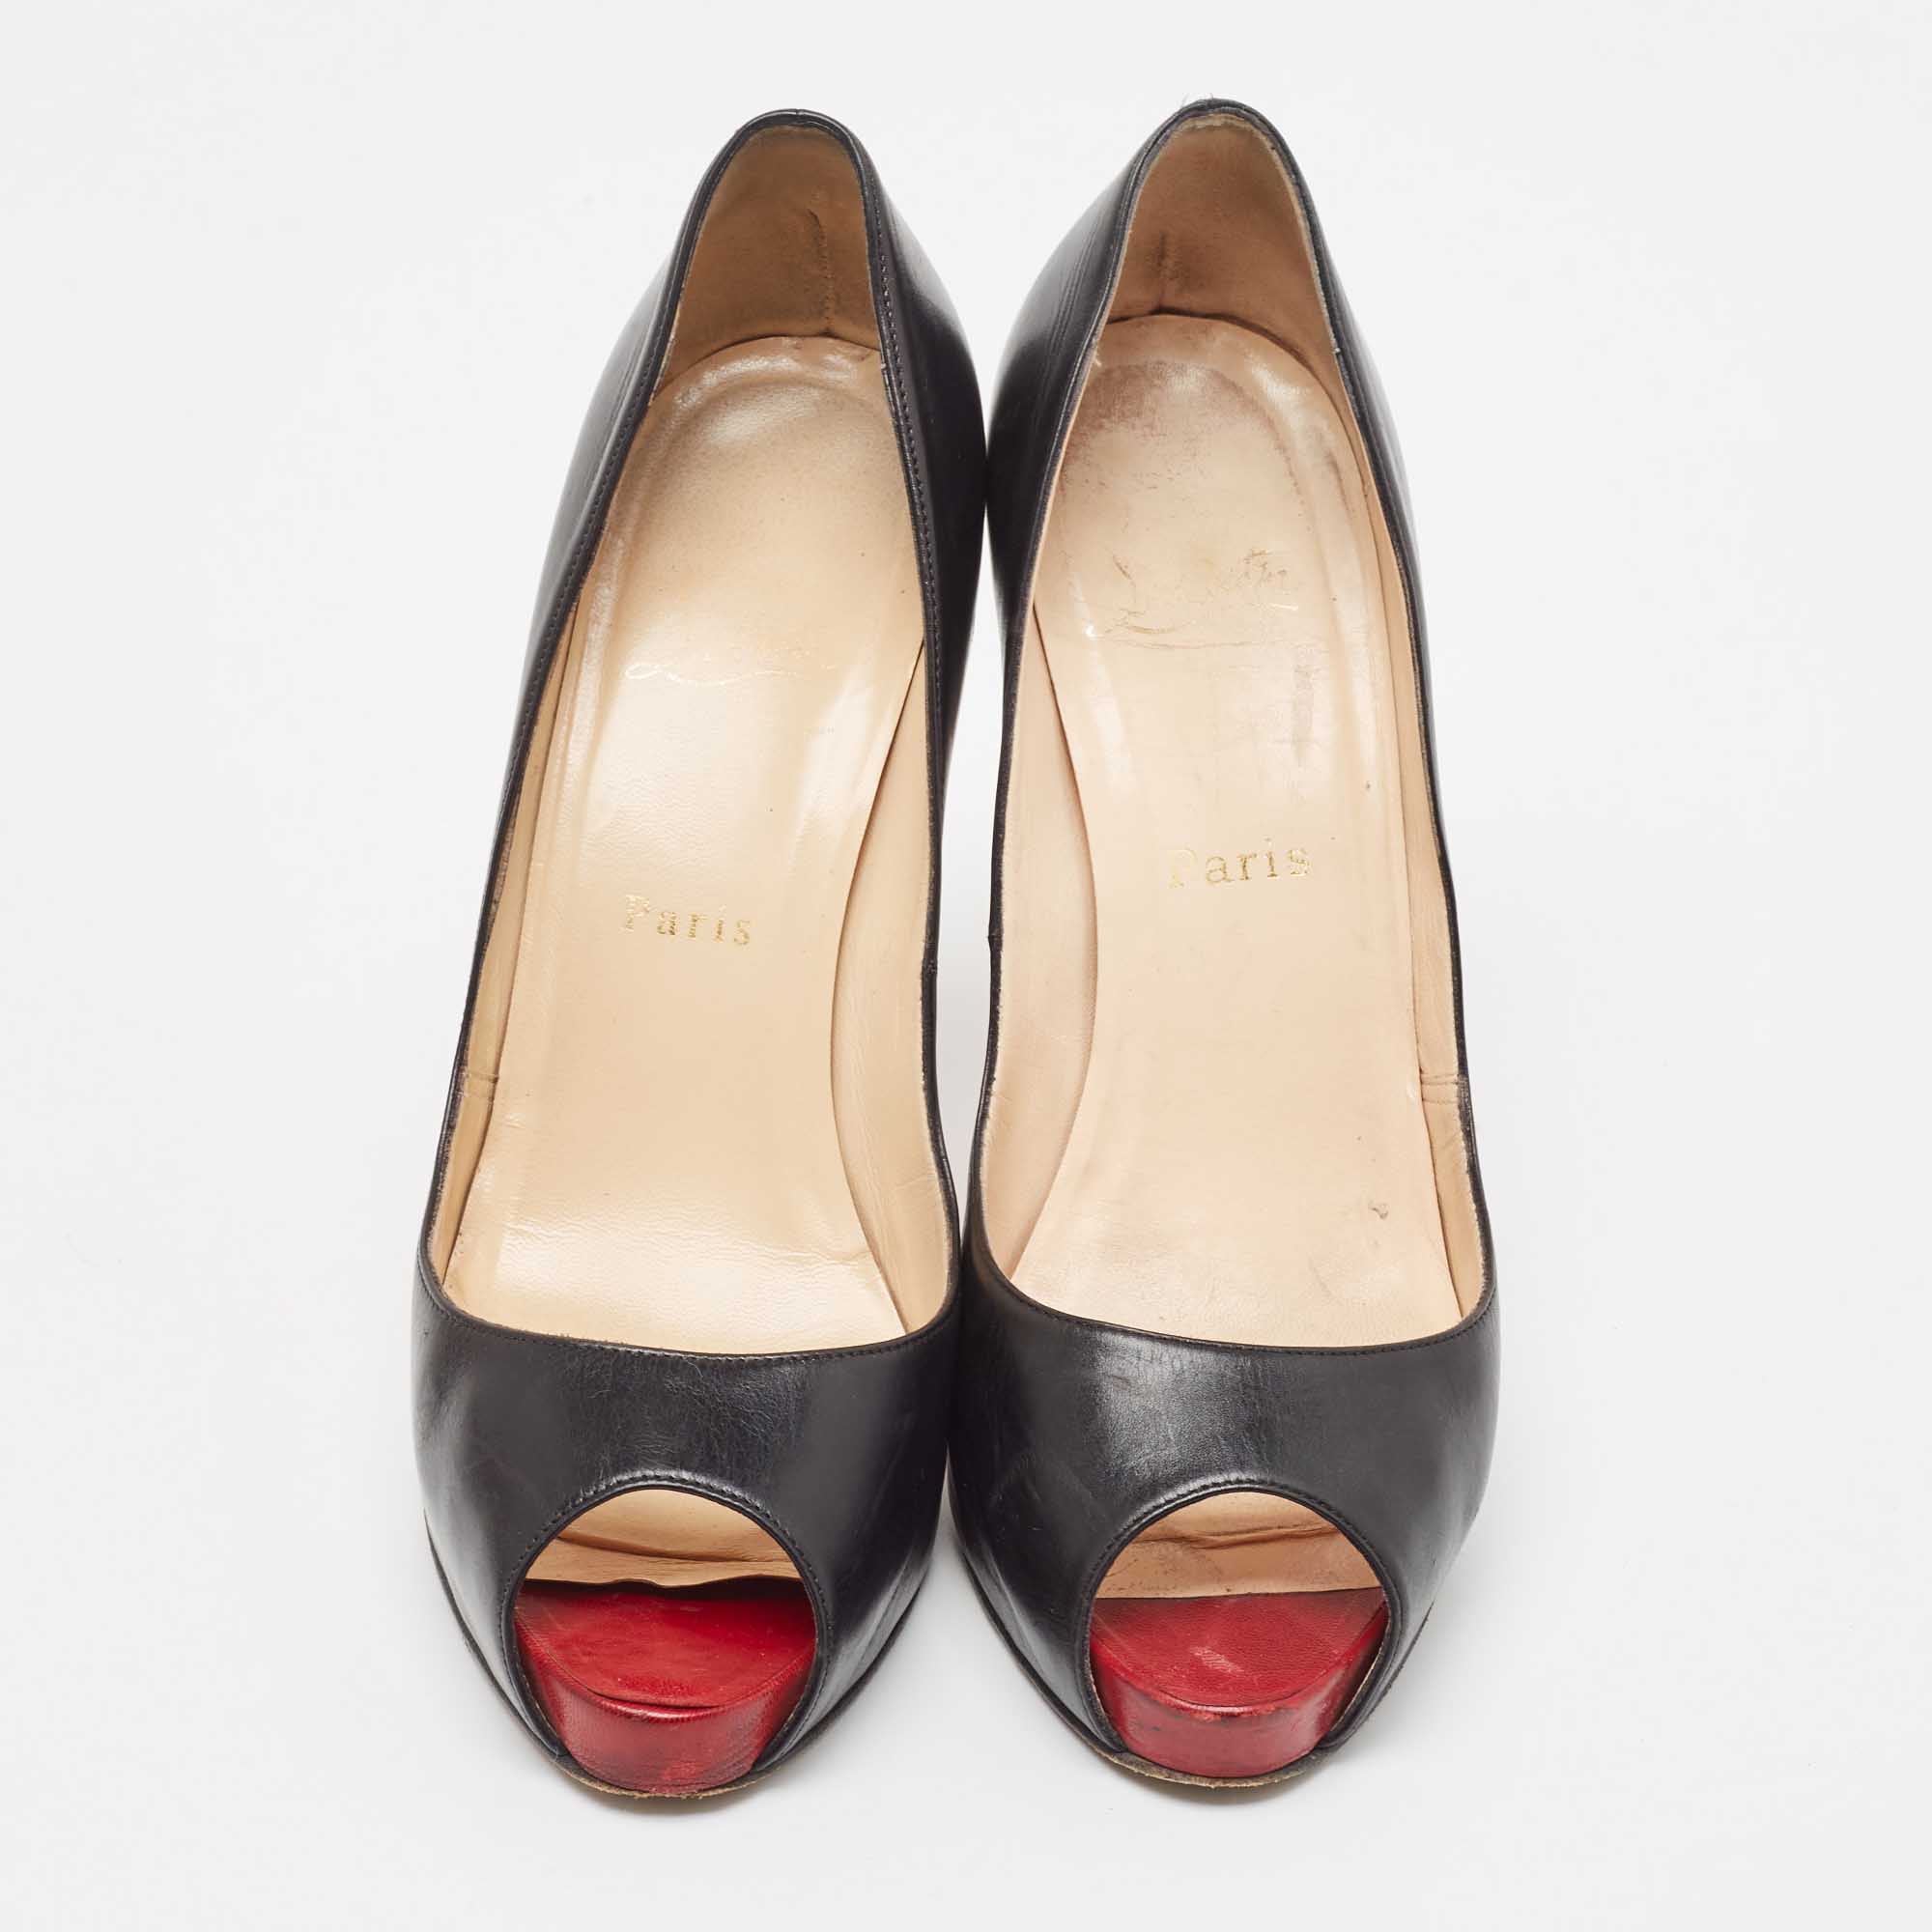 Christian Louboutin Black Leather Very Prive Pumps Size 40